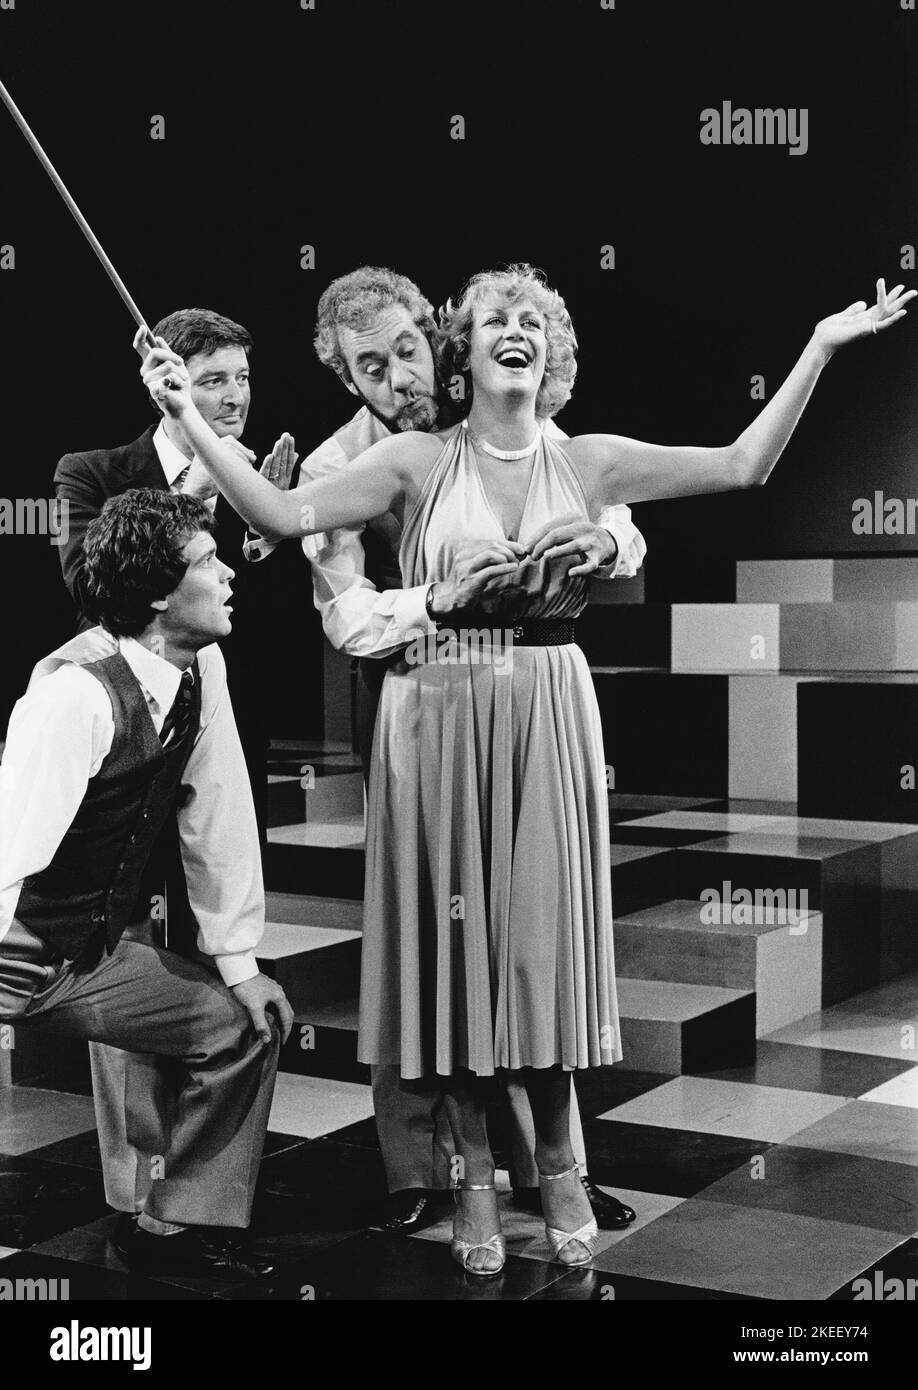 l-r: Martin Connor, Robin Ray, Jonathan Adams and Tricia George in TOMFOOLERY at the Criterion Theatre, London SW1  05/06/1980  words, music & lyrics by Tom Lehrer  compiled by Robin Ray & Cameron Mackintosh  musical director: Chris Walker  design: Adrian Faux  lighting: Andrew Bridge  director: Gillian Lynne Stock Photo